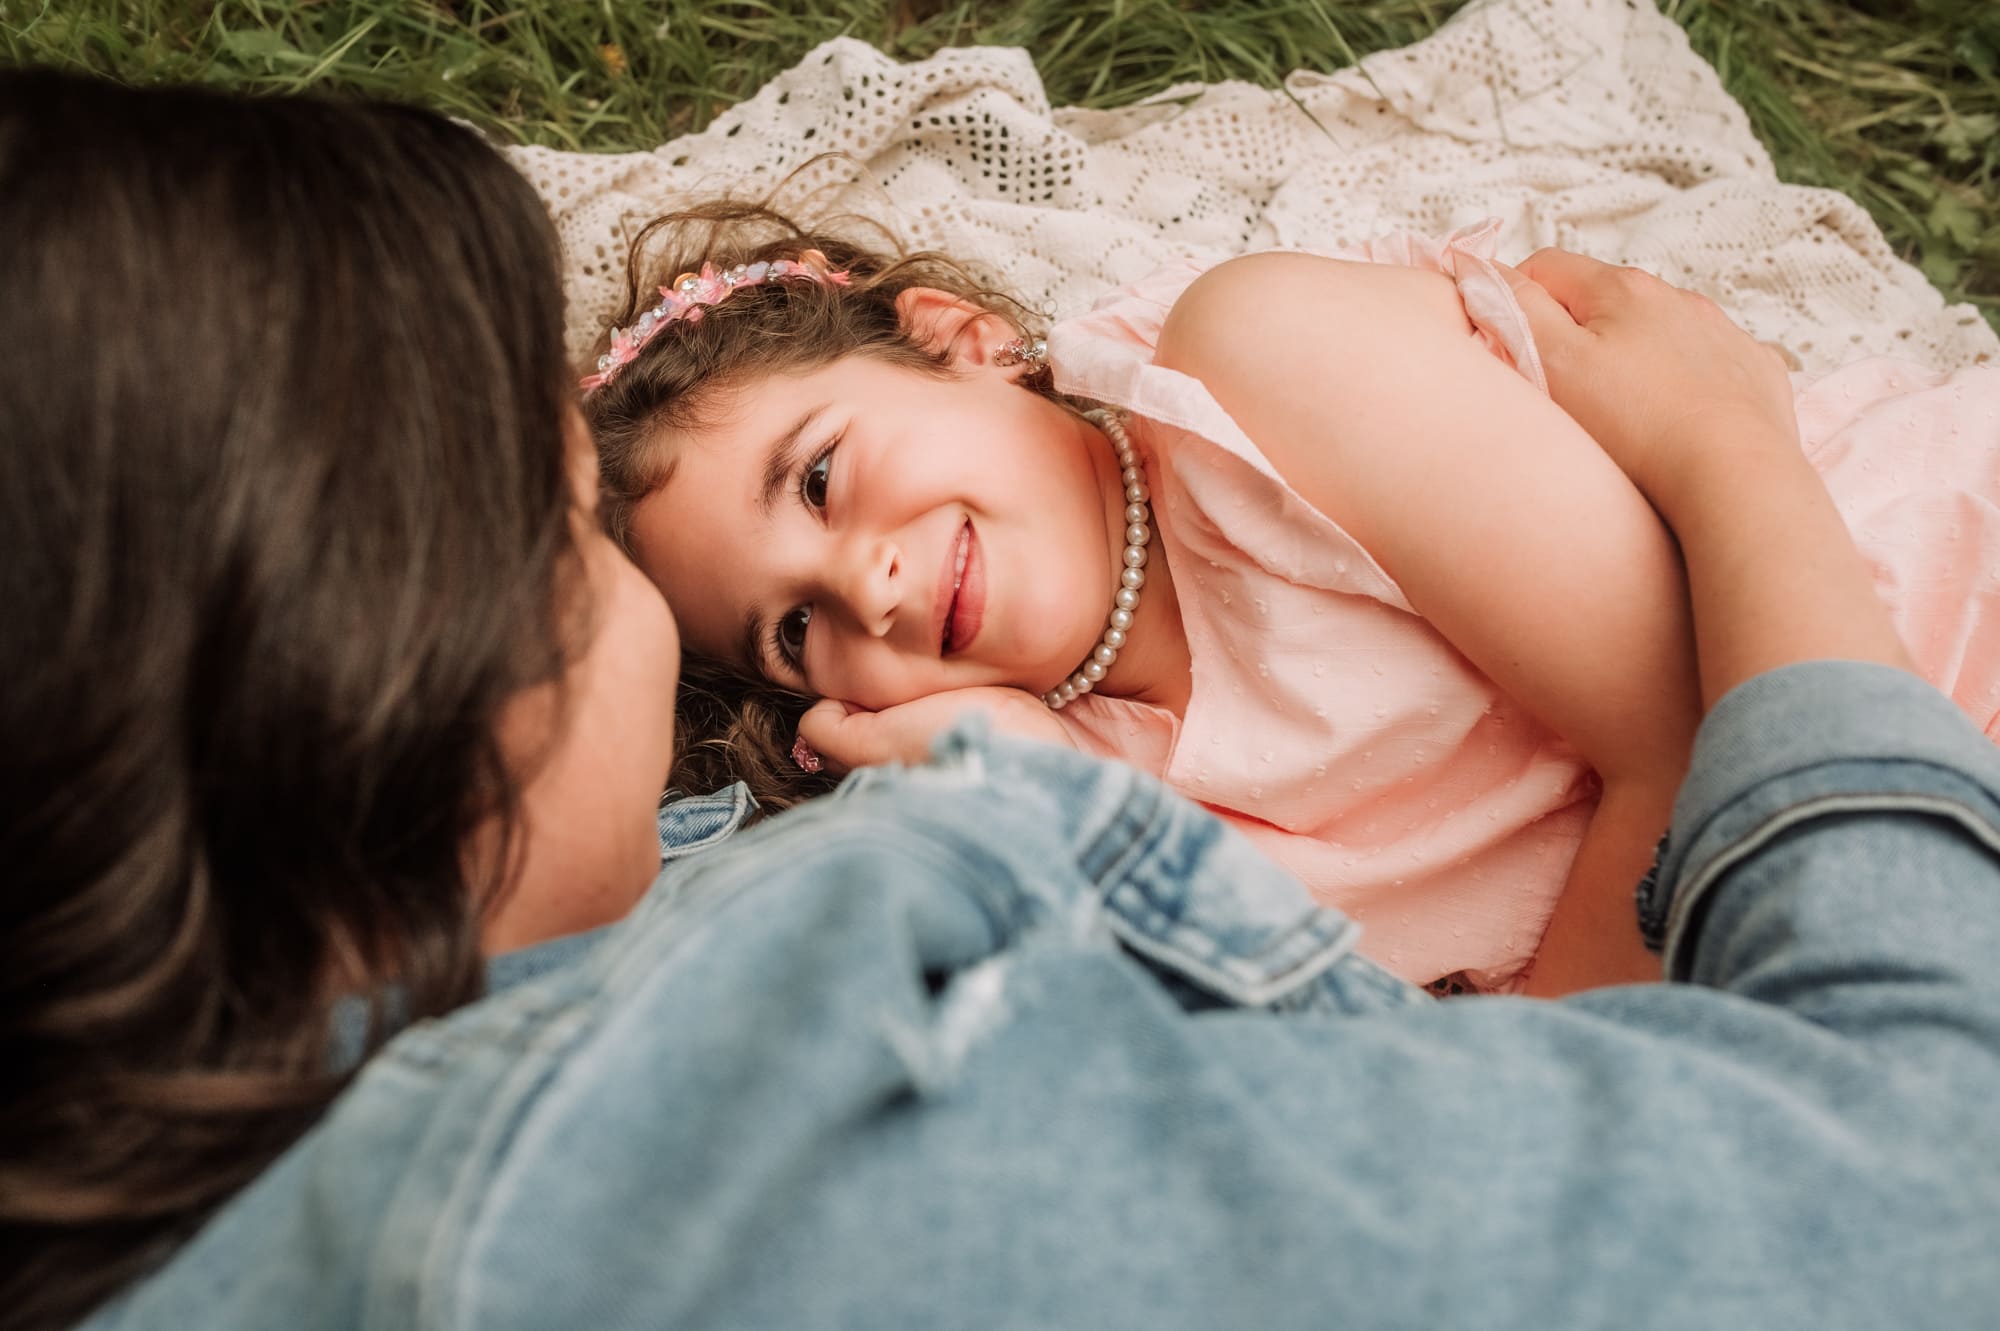 Mom and daughter lie on a blanket on the grass and share a tender look between them in this beautiful family photograph.